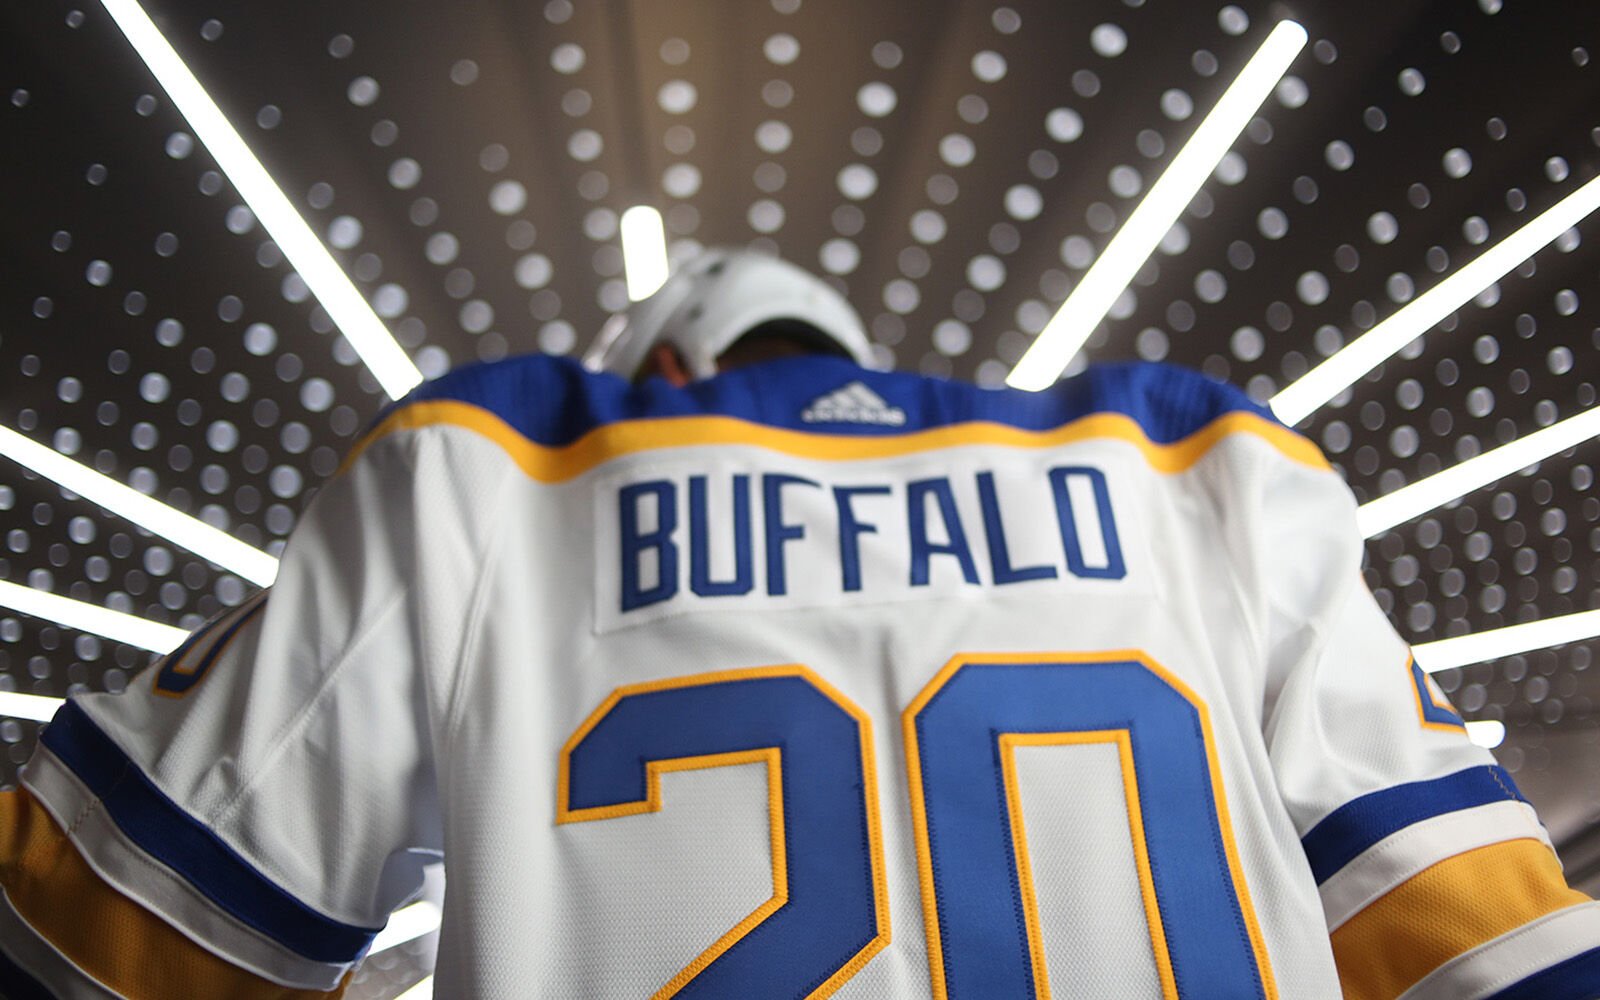 sabres white jersey